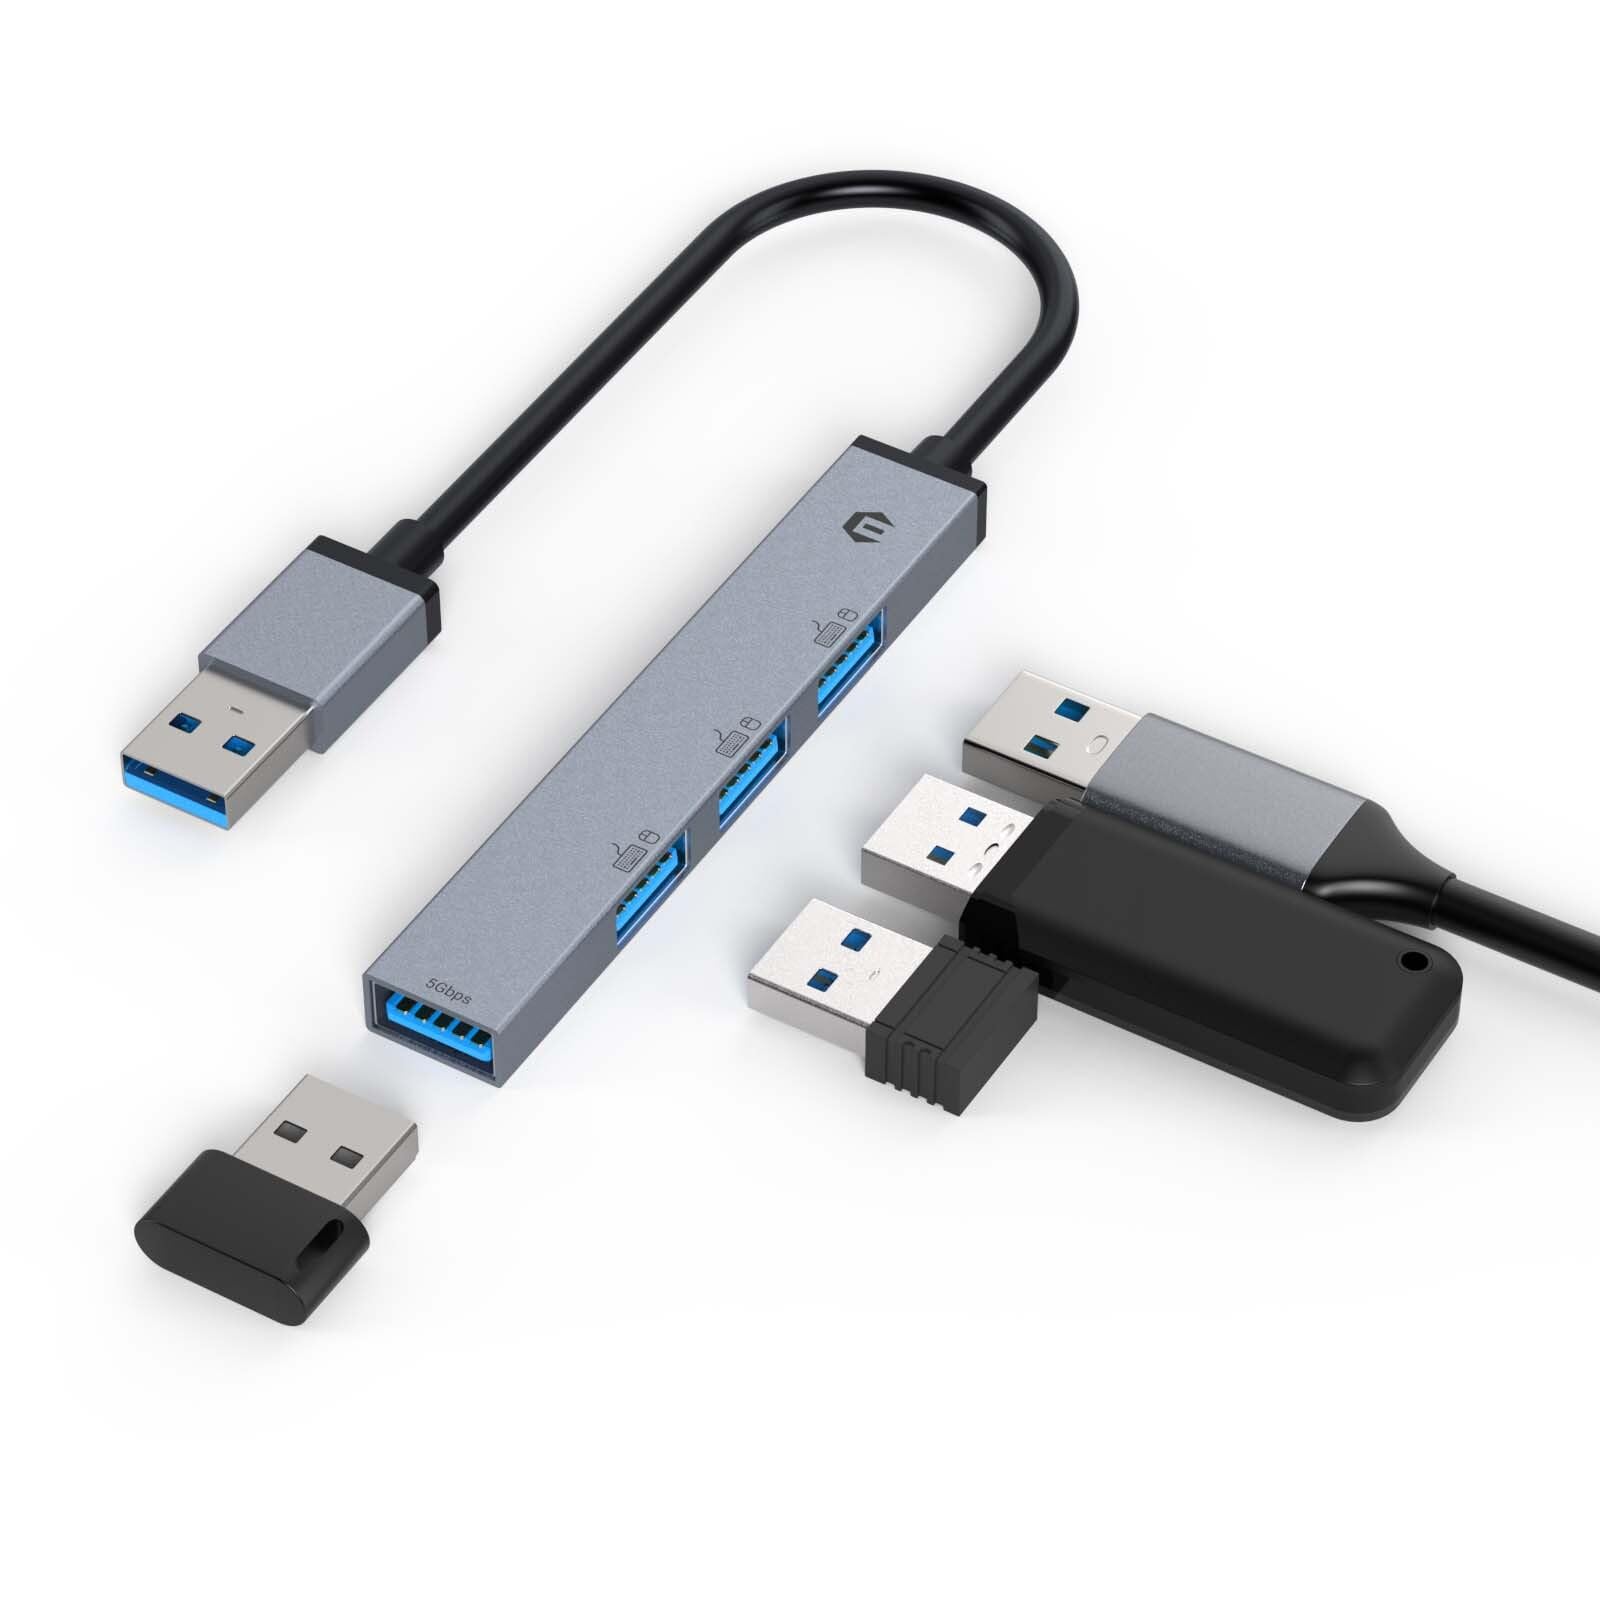 USB C Hub, TOTU Premium 4-Port USB A Hub, Featuring a Single Rapid 5Gbps USB 3.0 Port, and 3 High-Speed USB 2.0 Connectors for Seamless Integration Across Windows, Linux, Chrome OS Devices